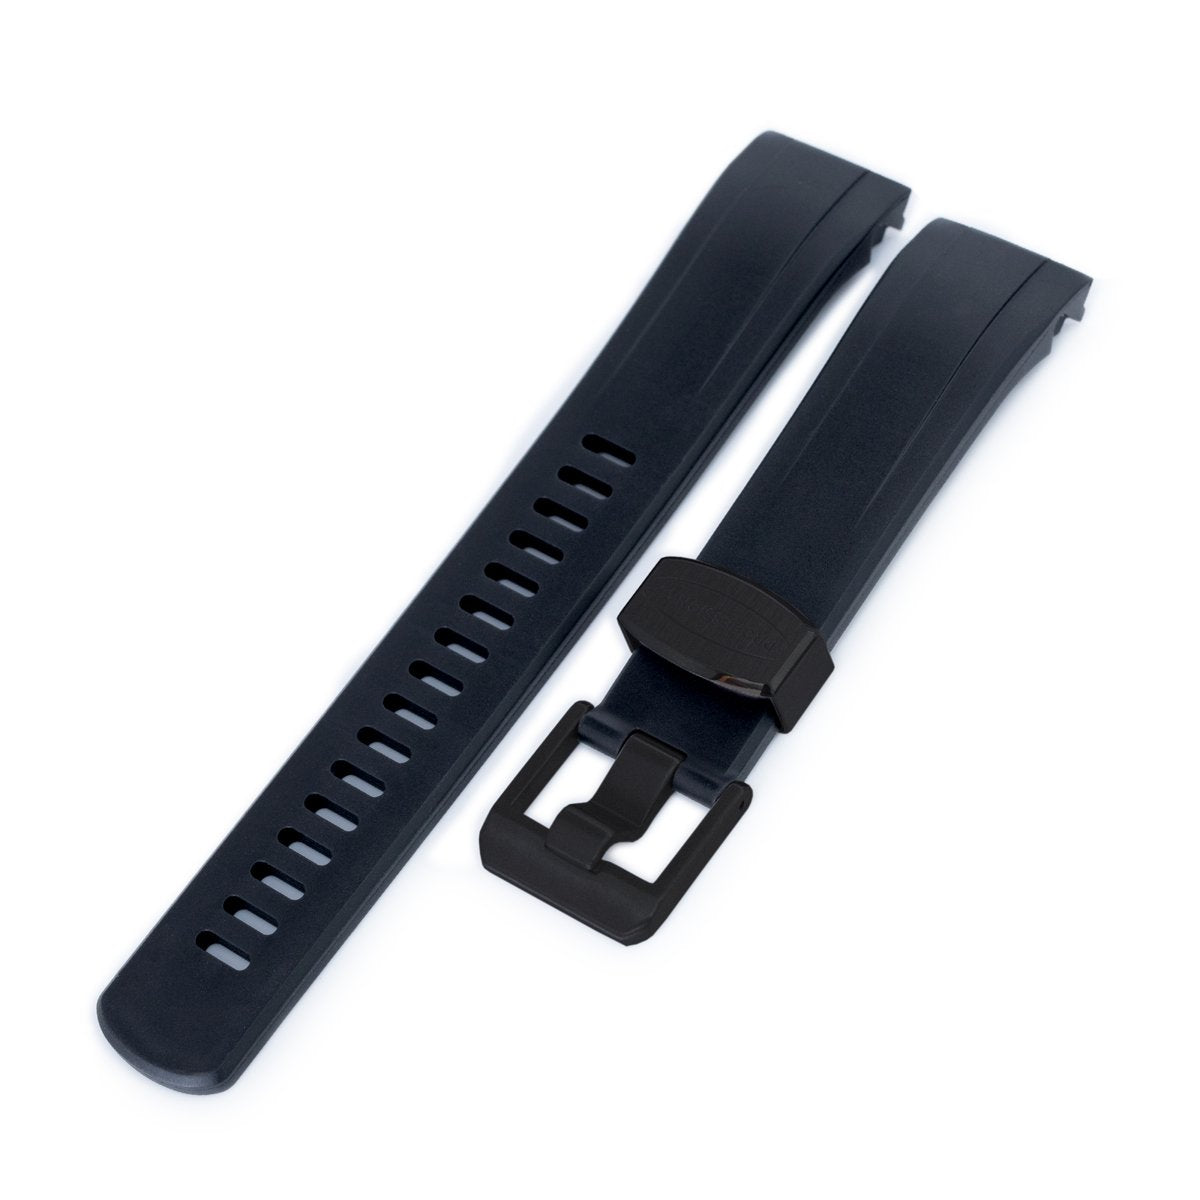 22mm Crafter Blue Black Rubber Curved Lug Watch Strap for Seiko Samurai SRPB51 PVD Black Buckle Strapcode Watch Bands